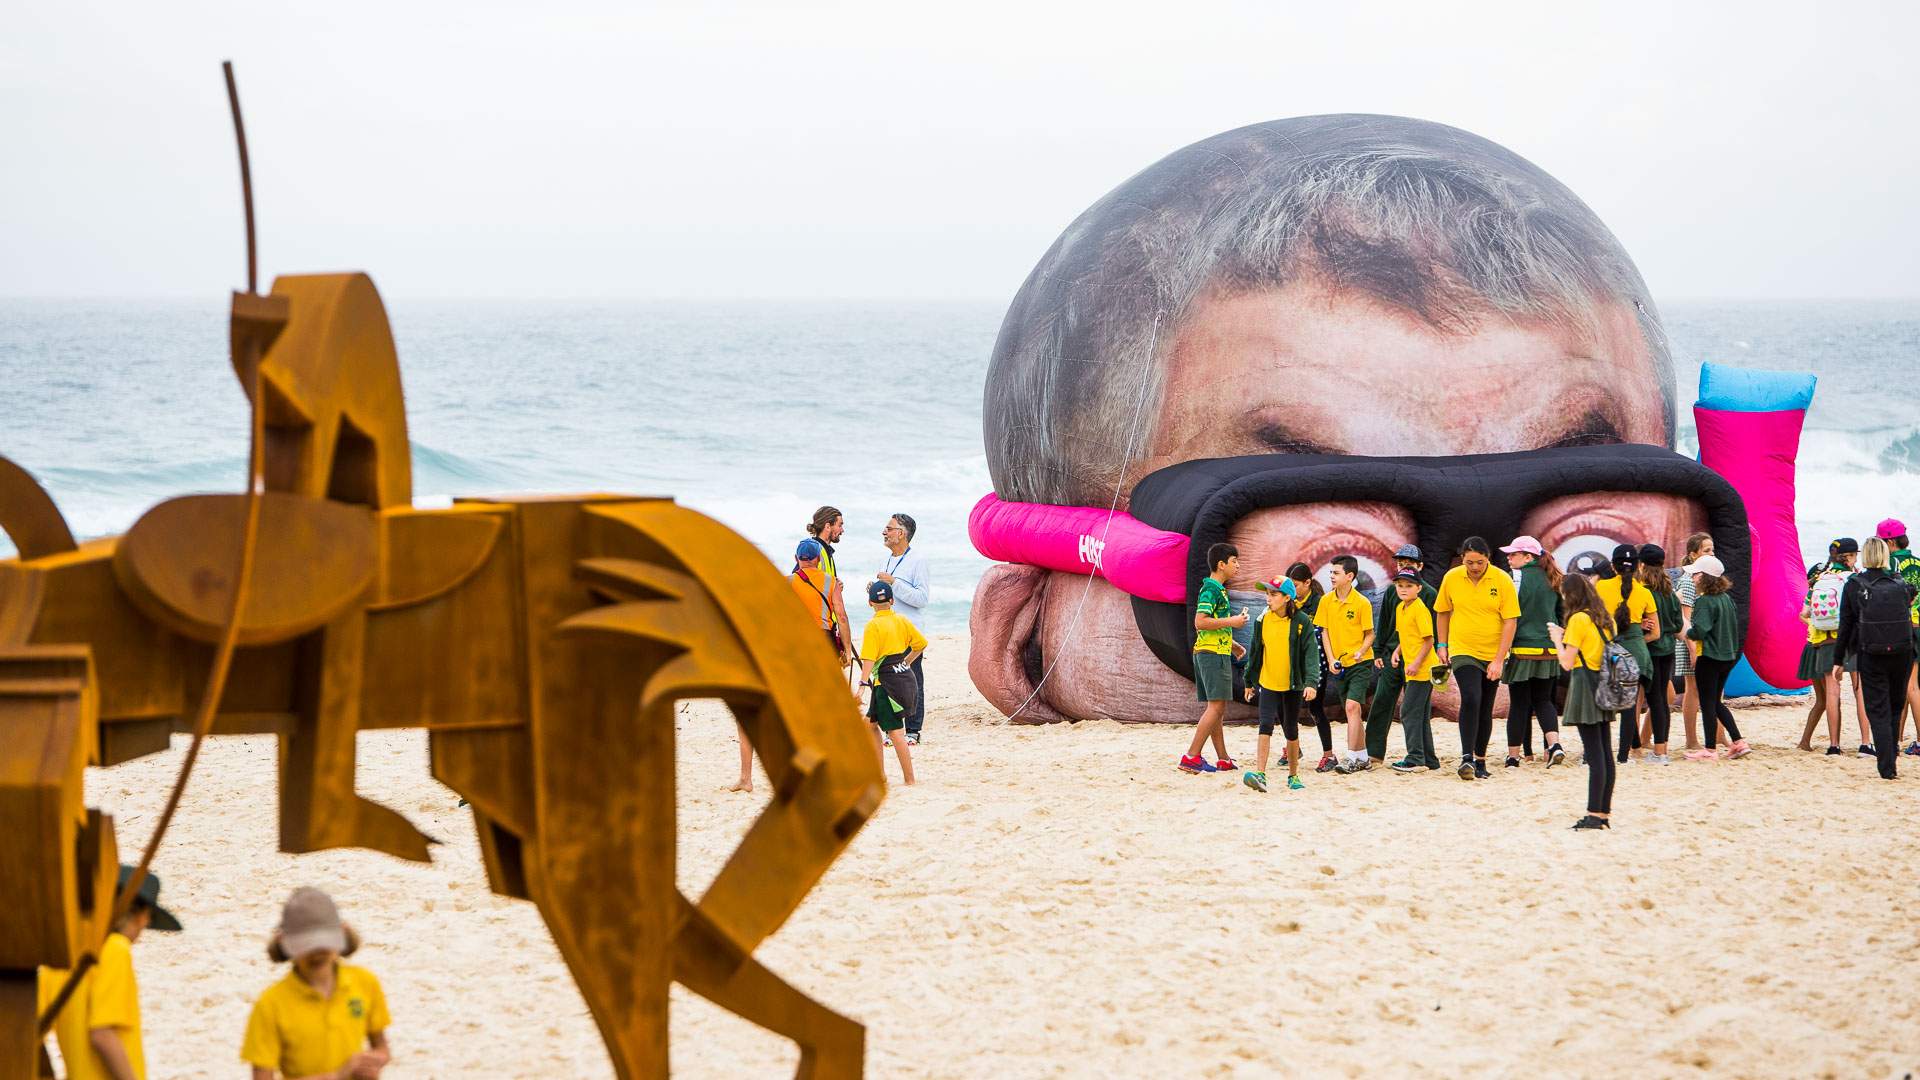 Sculpture by the Sea Could Leave Bondi After 23 Years of Art Exhibitions